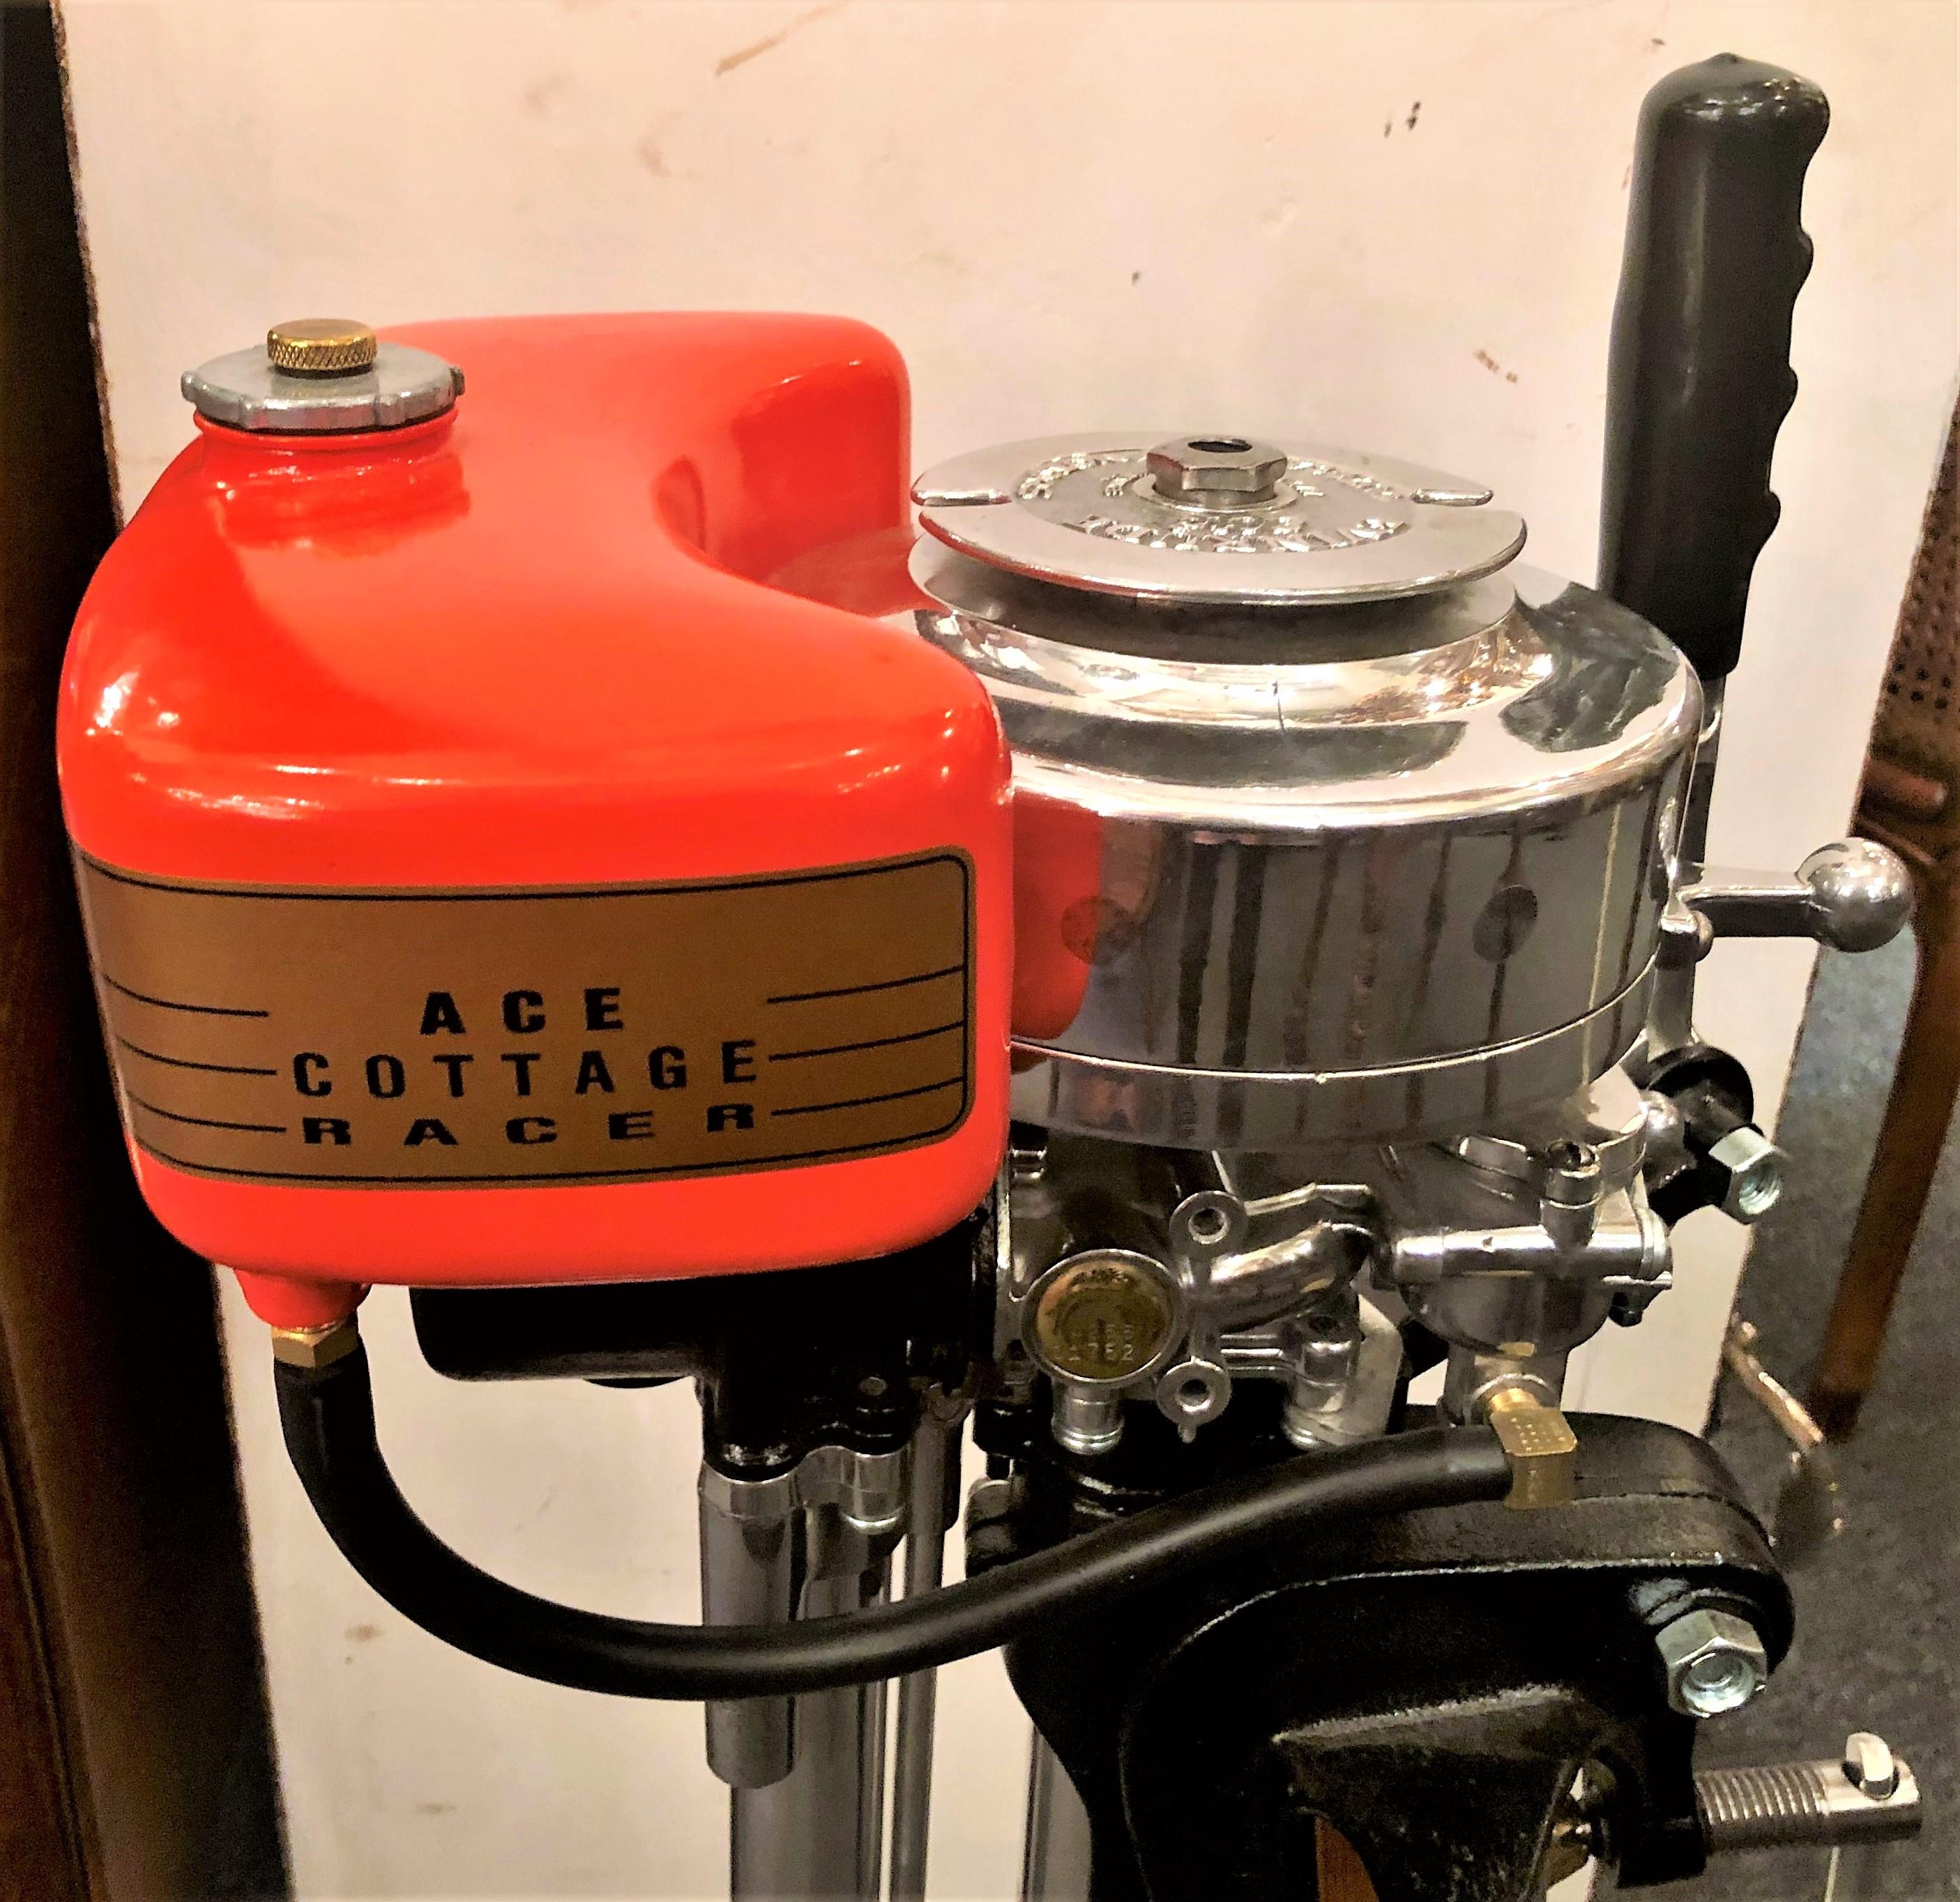 Estate American Evinrude cottage racer outboard motor mounted on custom made stand, circa 1930s-1940s.
Once a working motor, this piece has been restored as a collectible item and is not recommended for actual use.